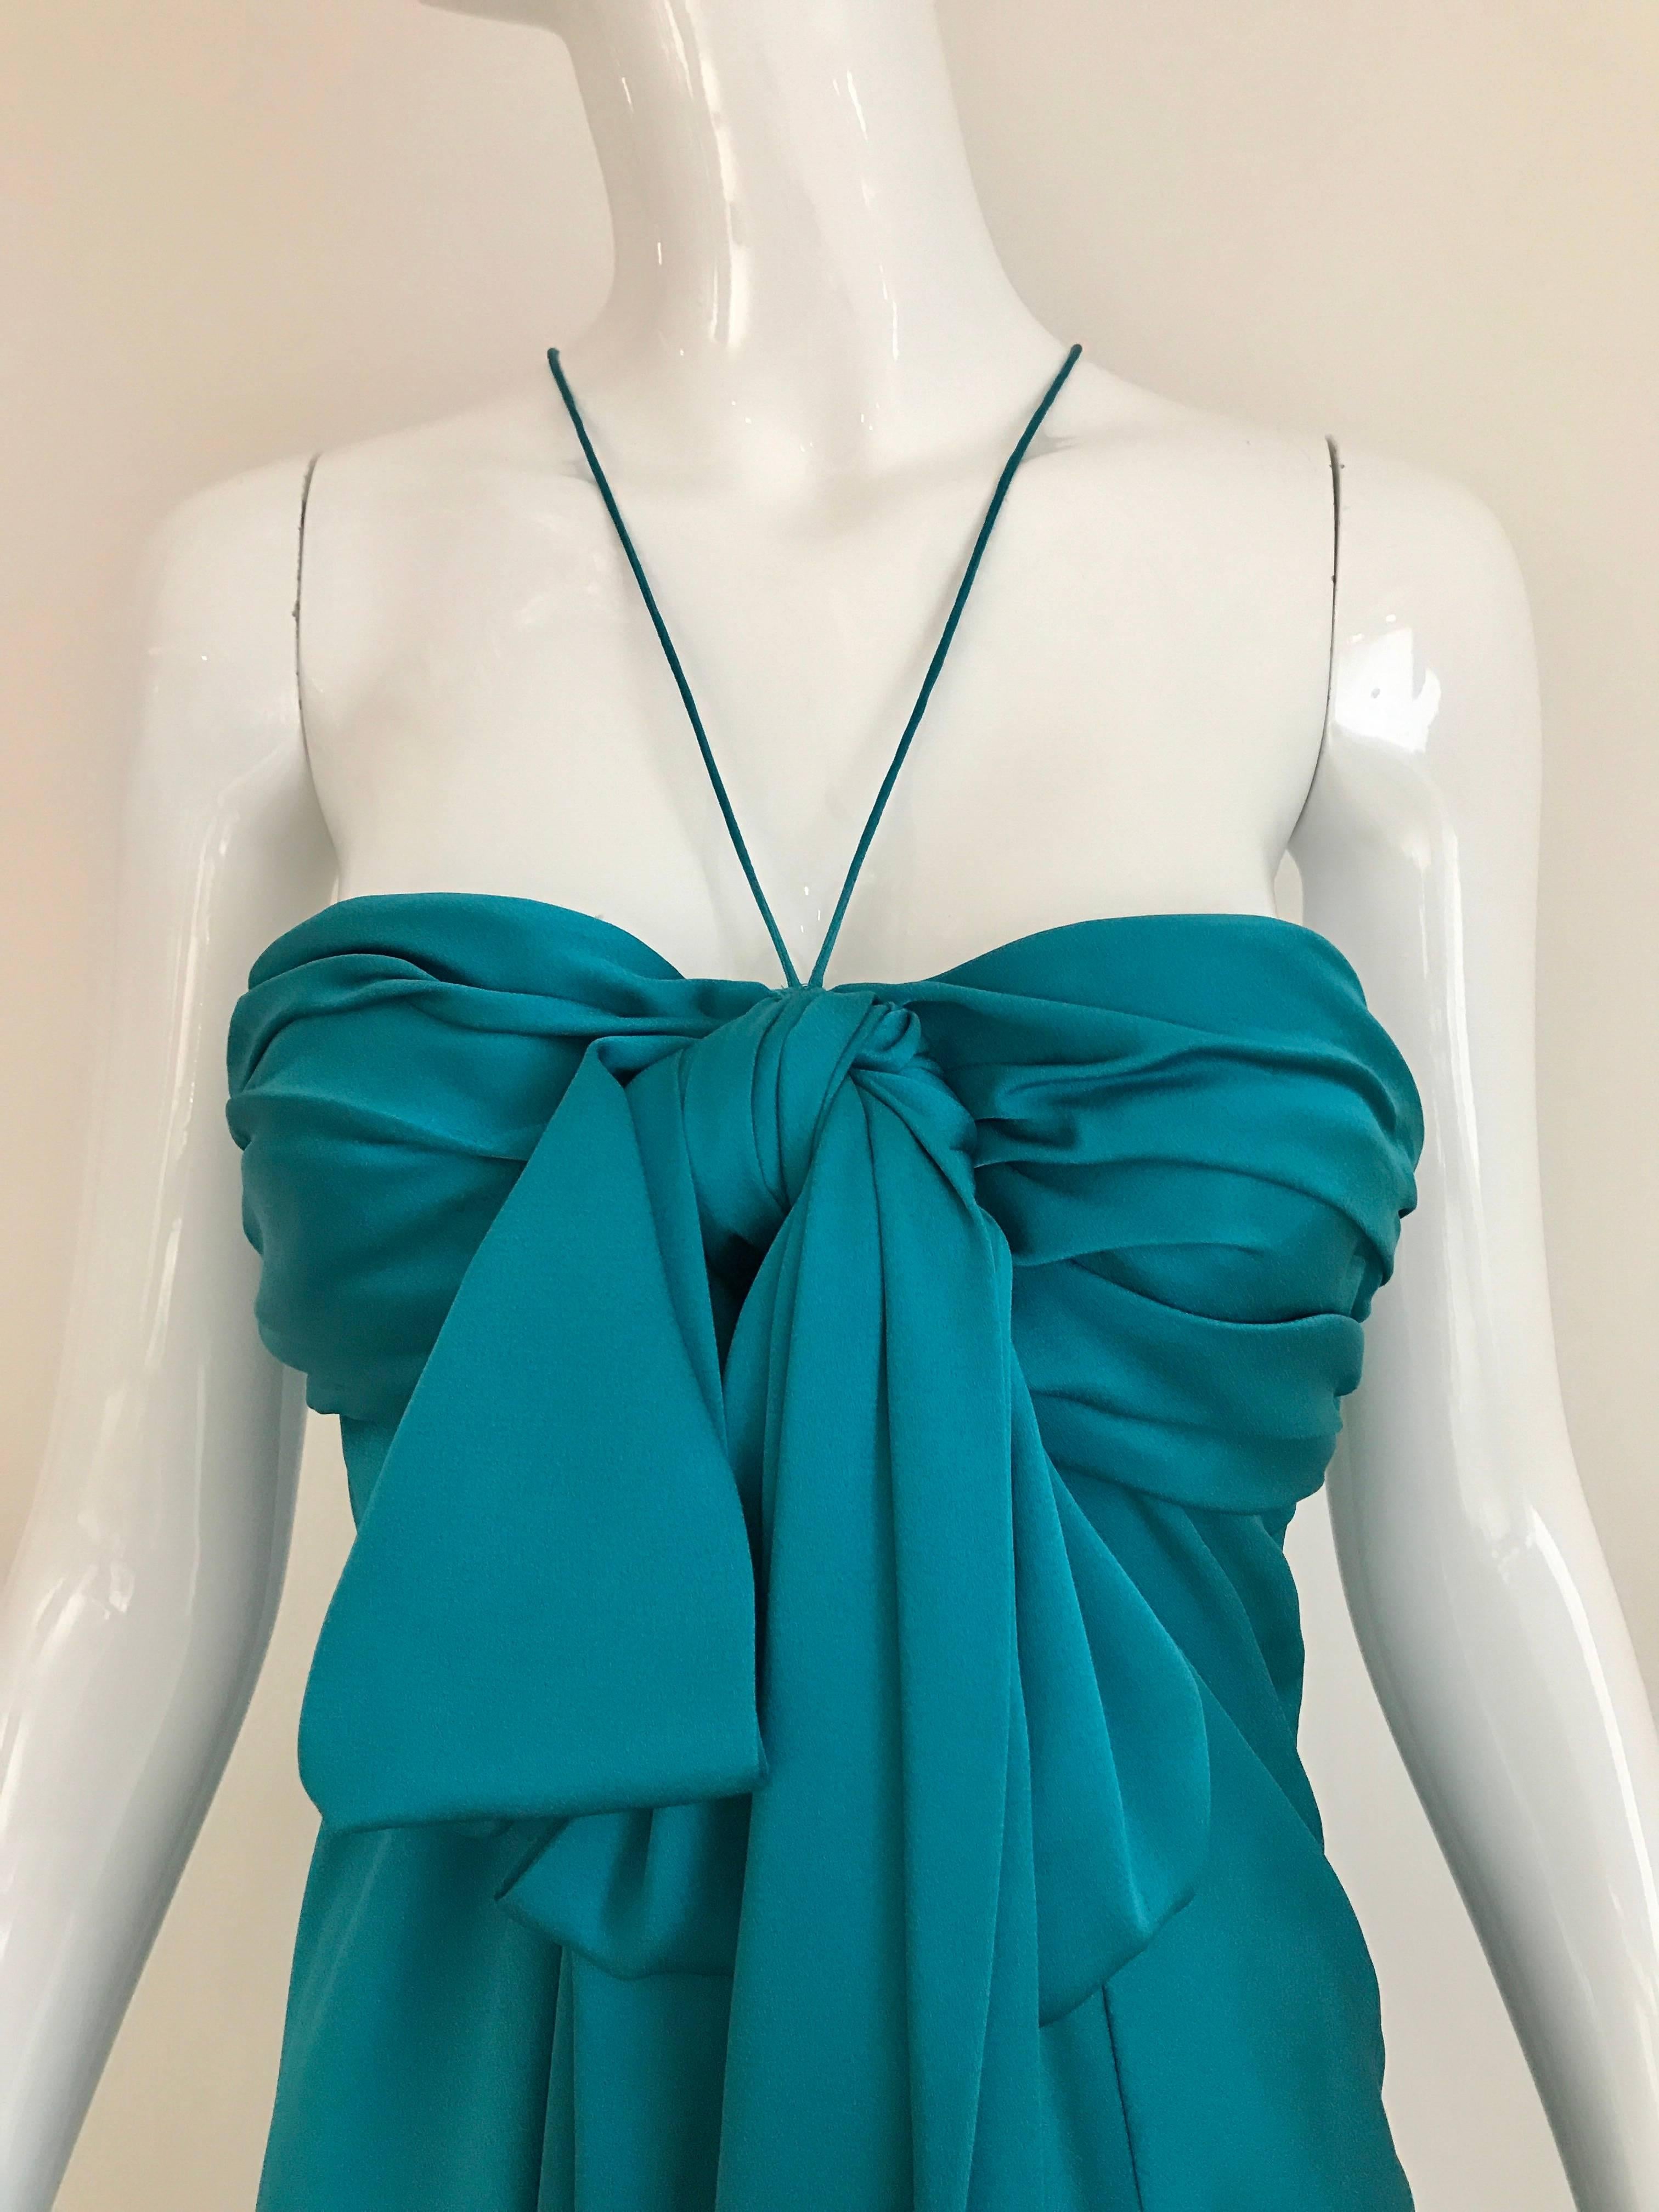 Beautiful Late 1990s John Galliano empire sweetheart bust bias cut  gown with thin spaghetti strap with slit. Big bow ties in the front.
Fit US size 4 or 6 
Bust 34 - 36 inch /Waist: 32 inch / hip : 44 inch / Dress Length: 56 inch
Dress is barely